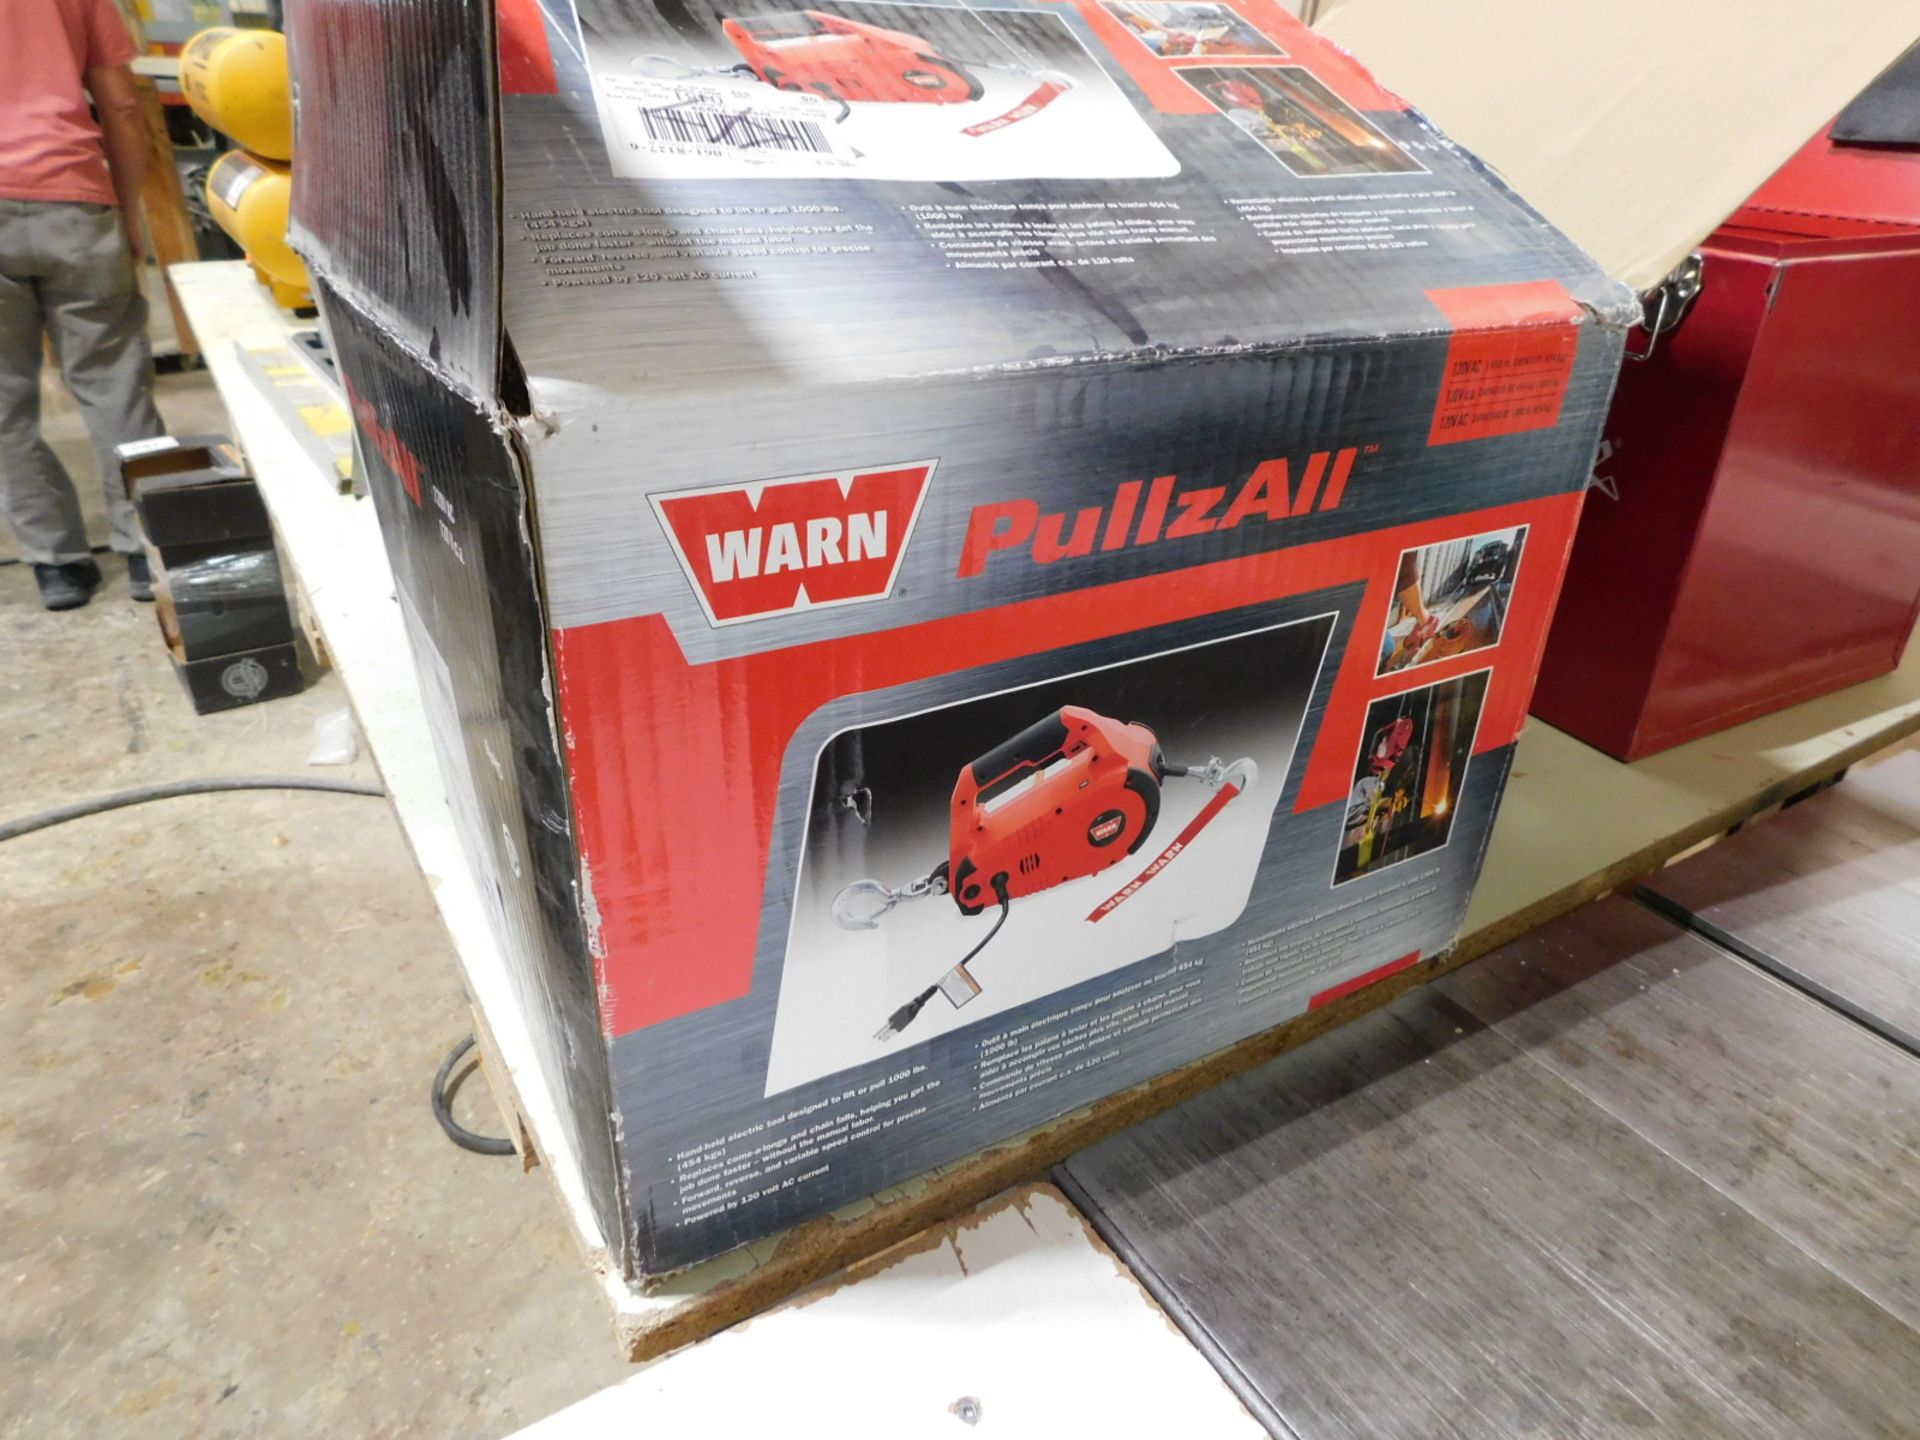 WARN PULLZALL 120V HAND HELD ELECTRIC WINCH, 1000 LB. CAP. - Image 2 of 2